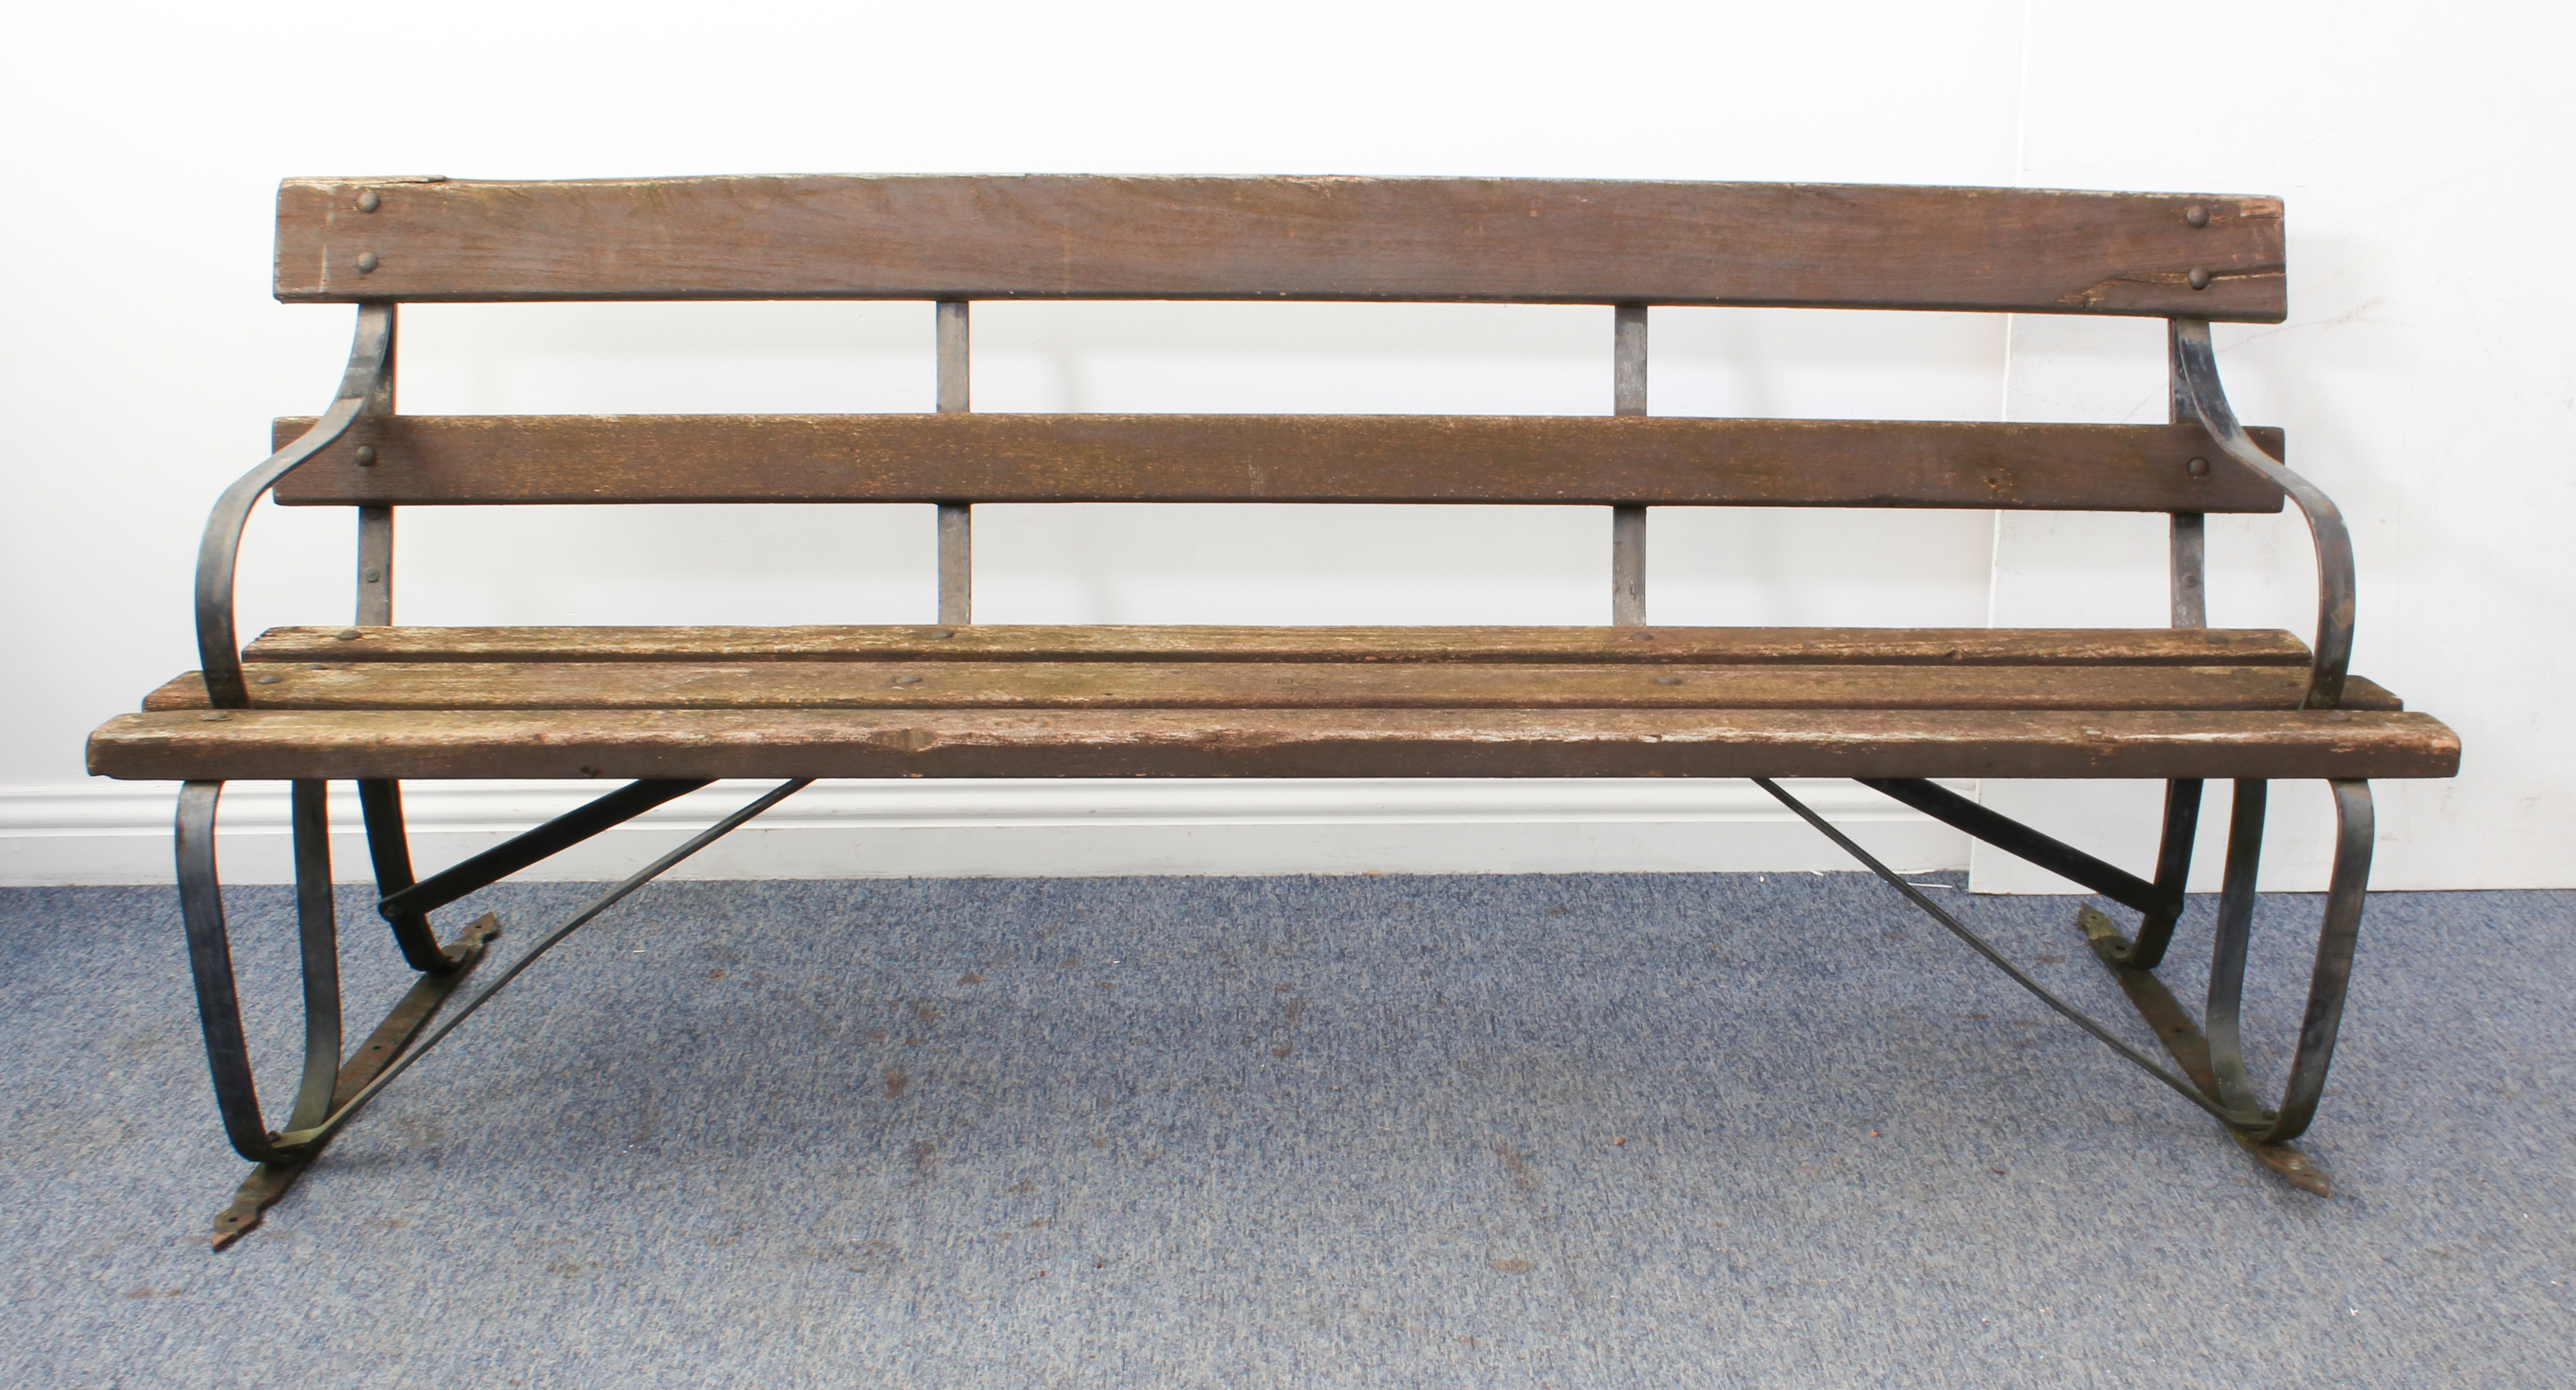 A wrought iron and hardwood slatted garden bench - 198 cm long. (similar to lot 549)